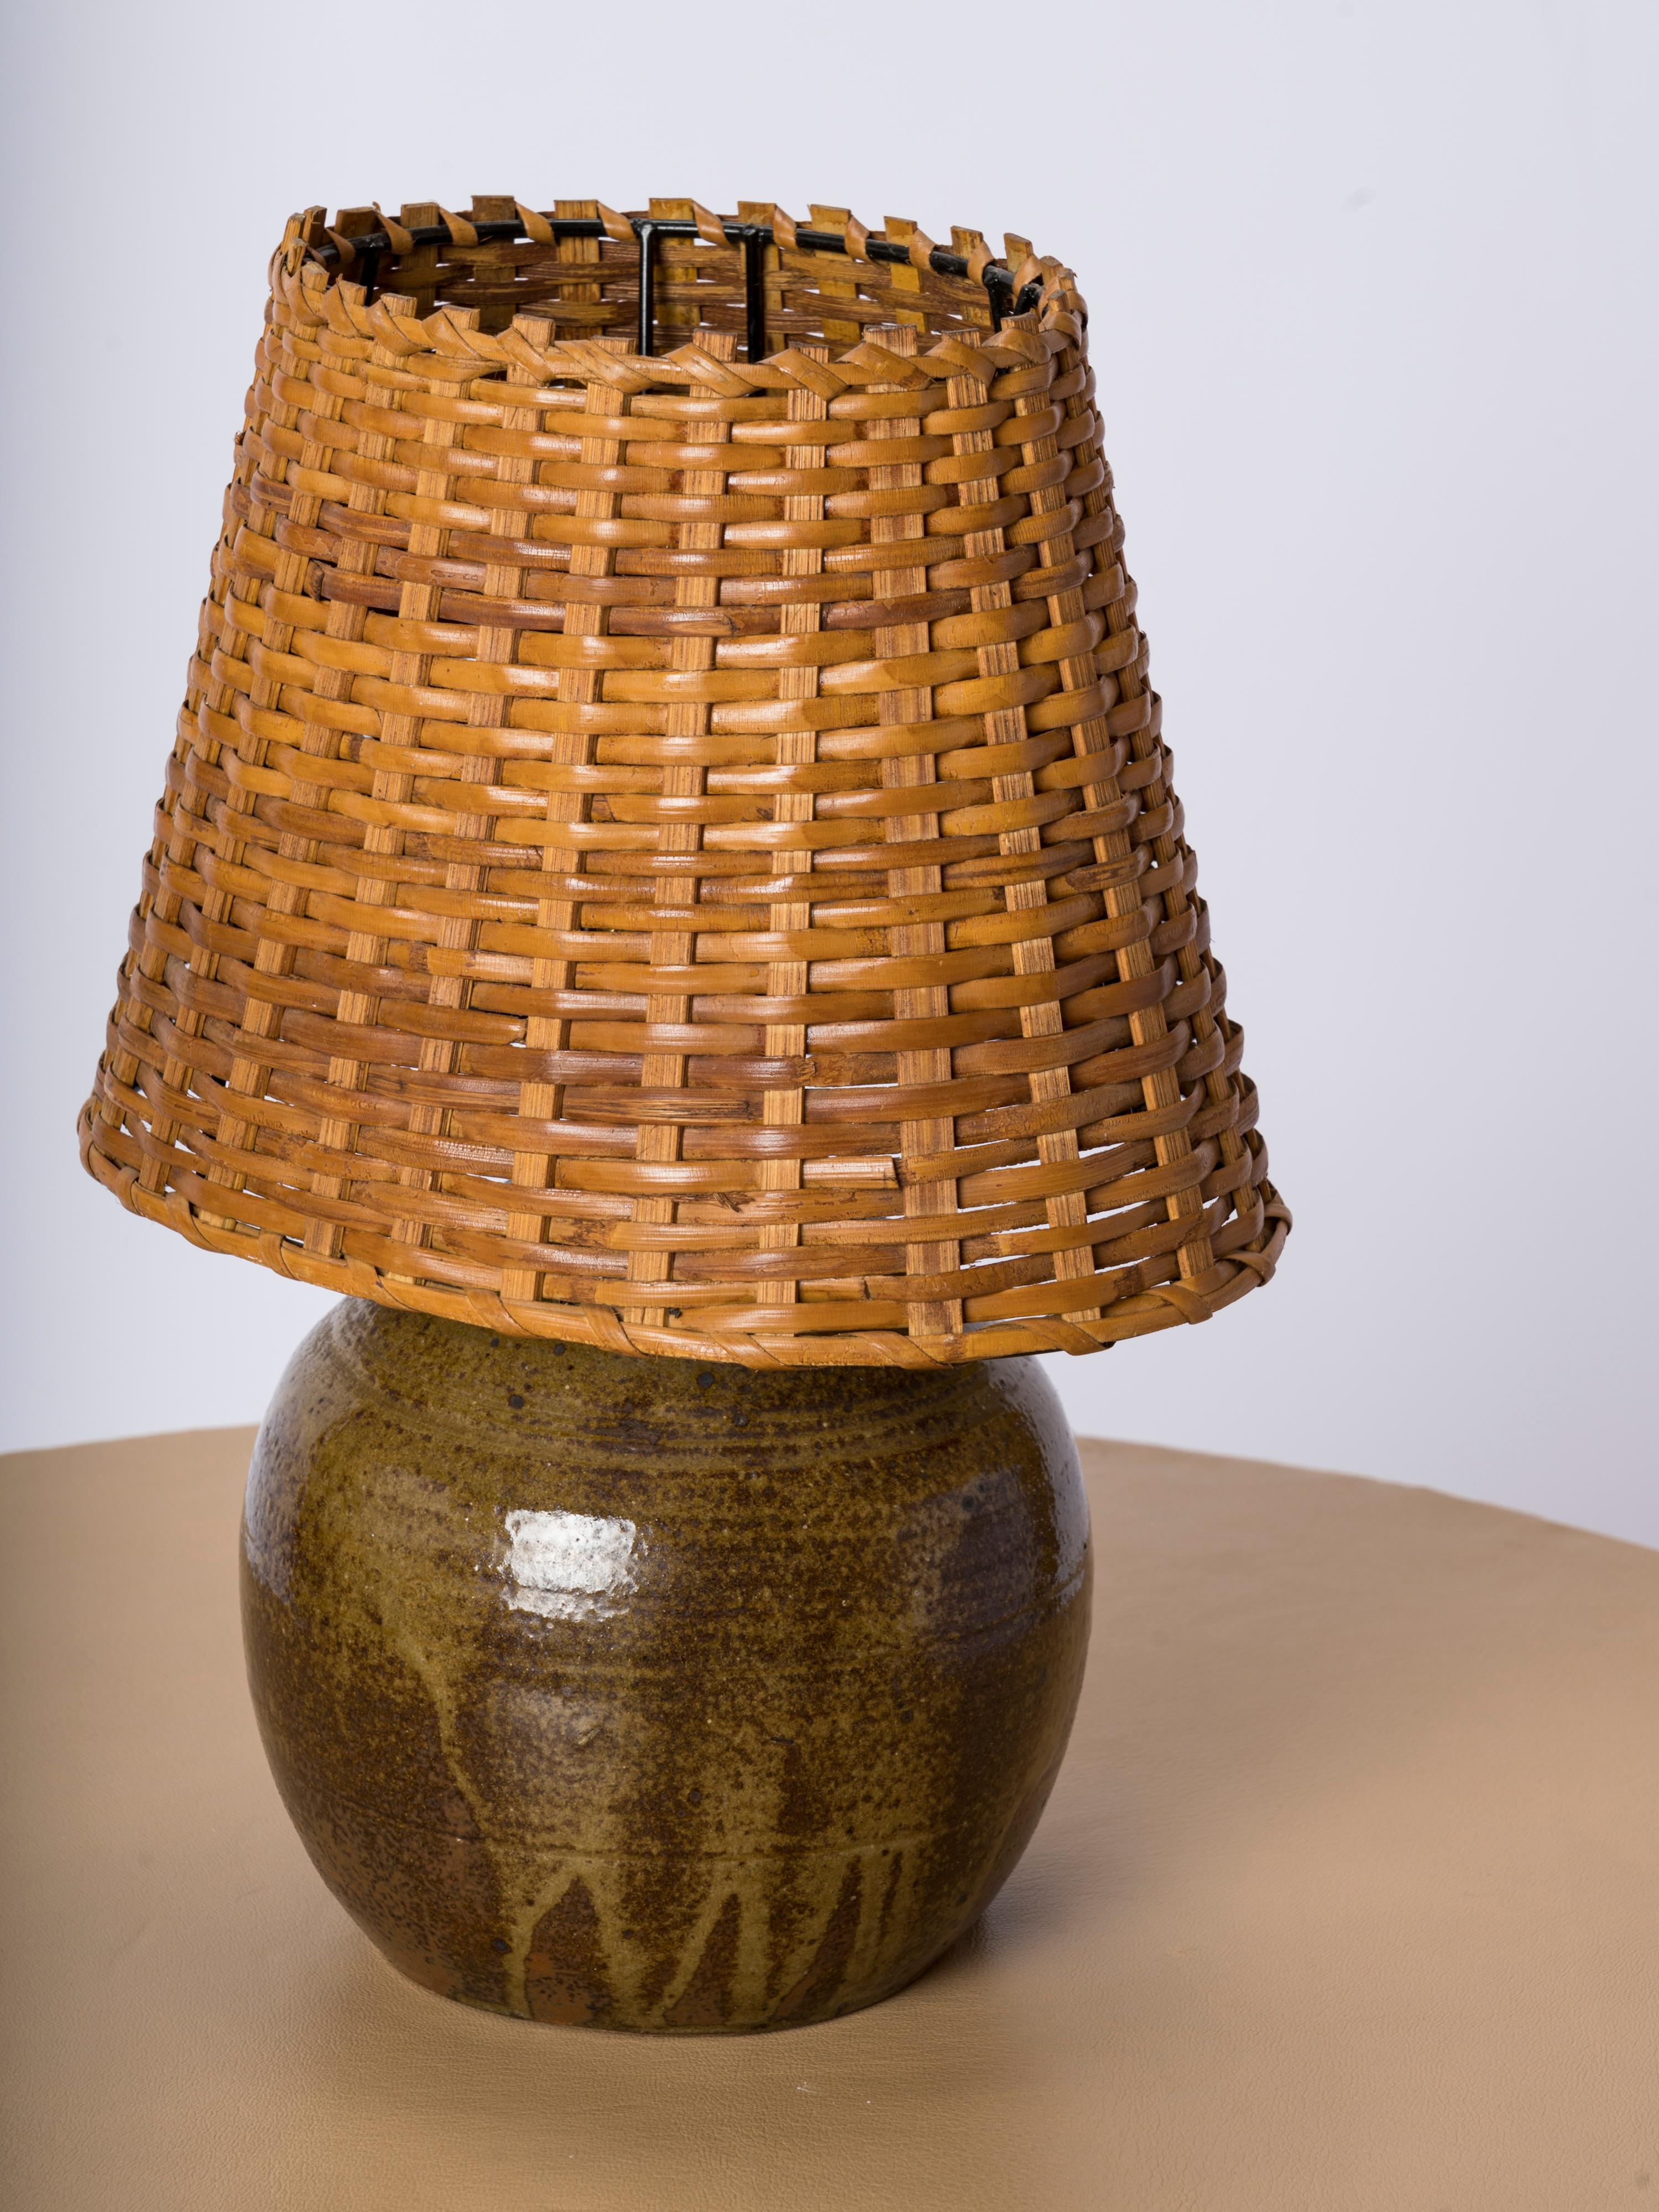 French Shades of Green Petite Ceramic Table Lamp w. Wicker Shade - France 1970's